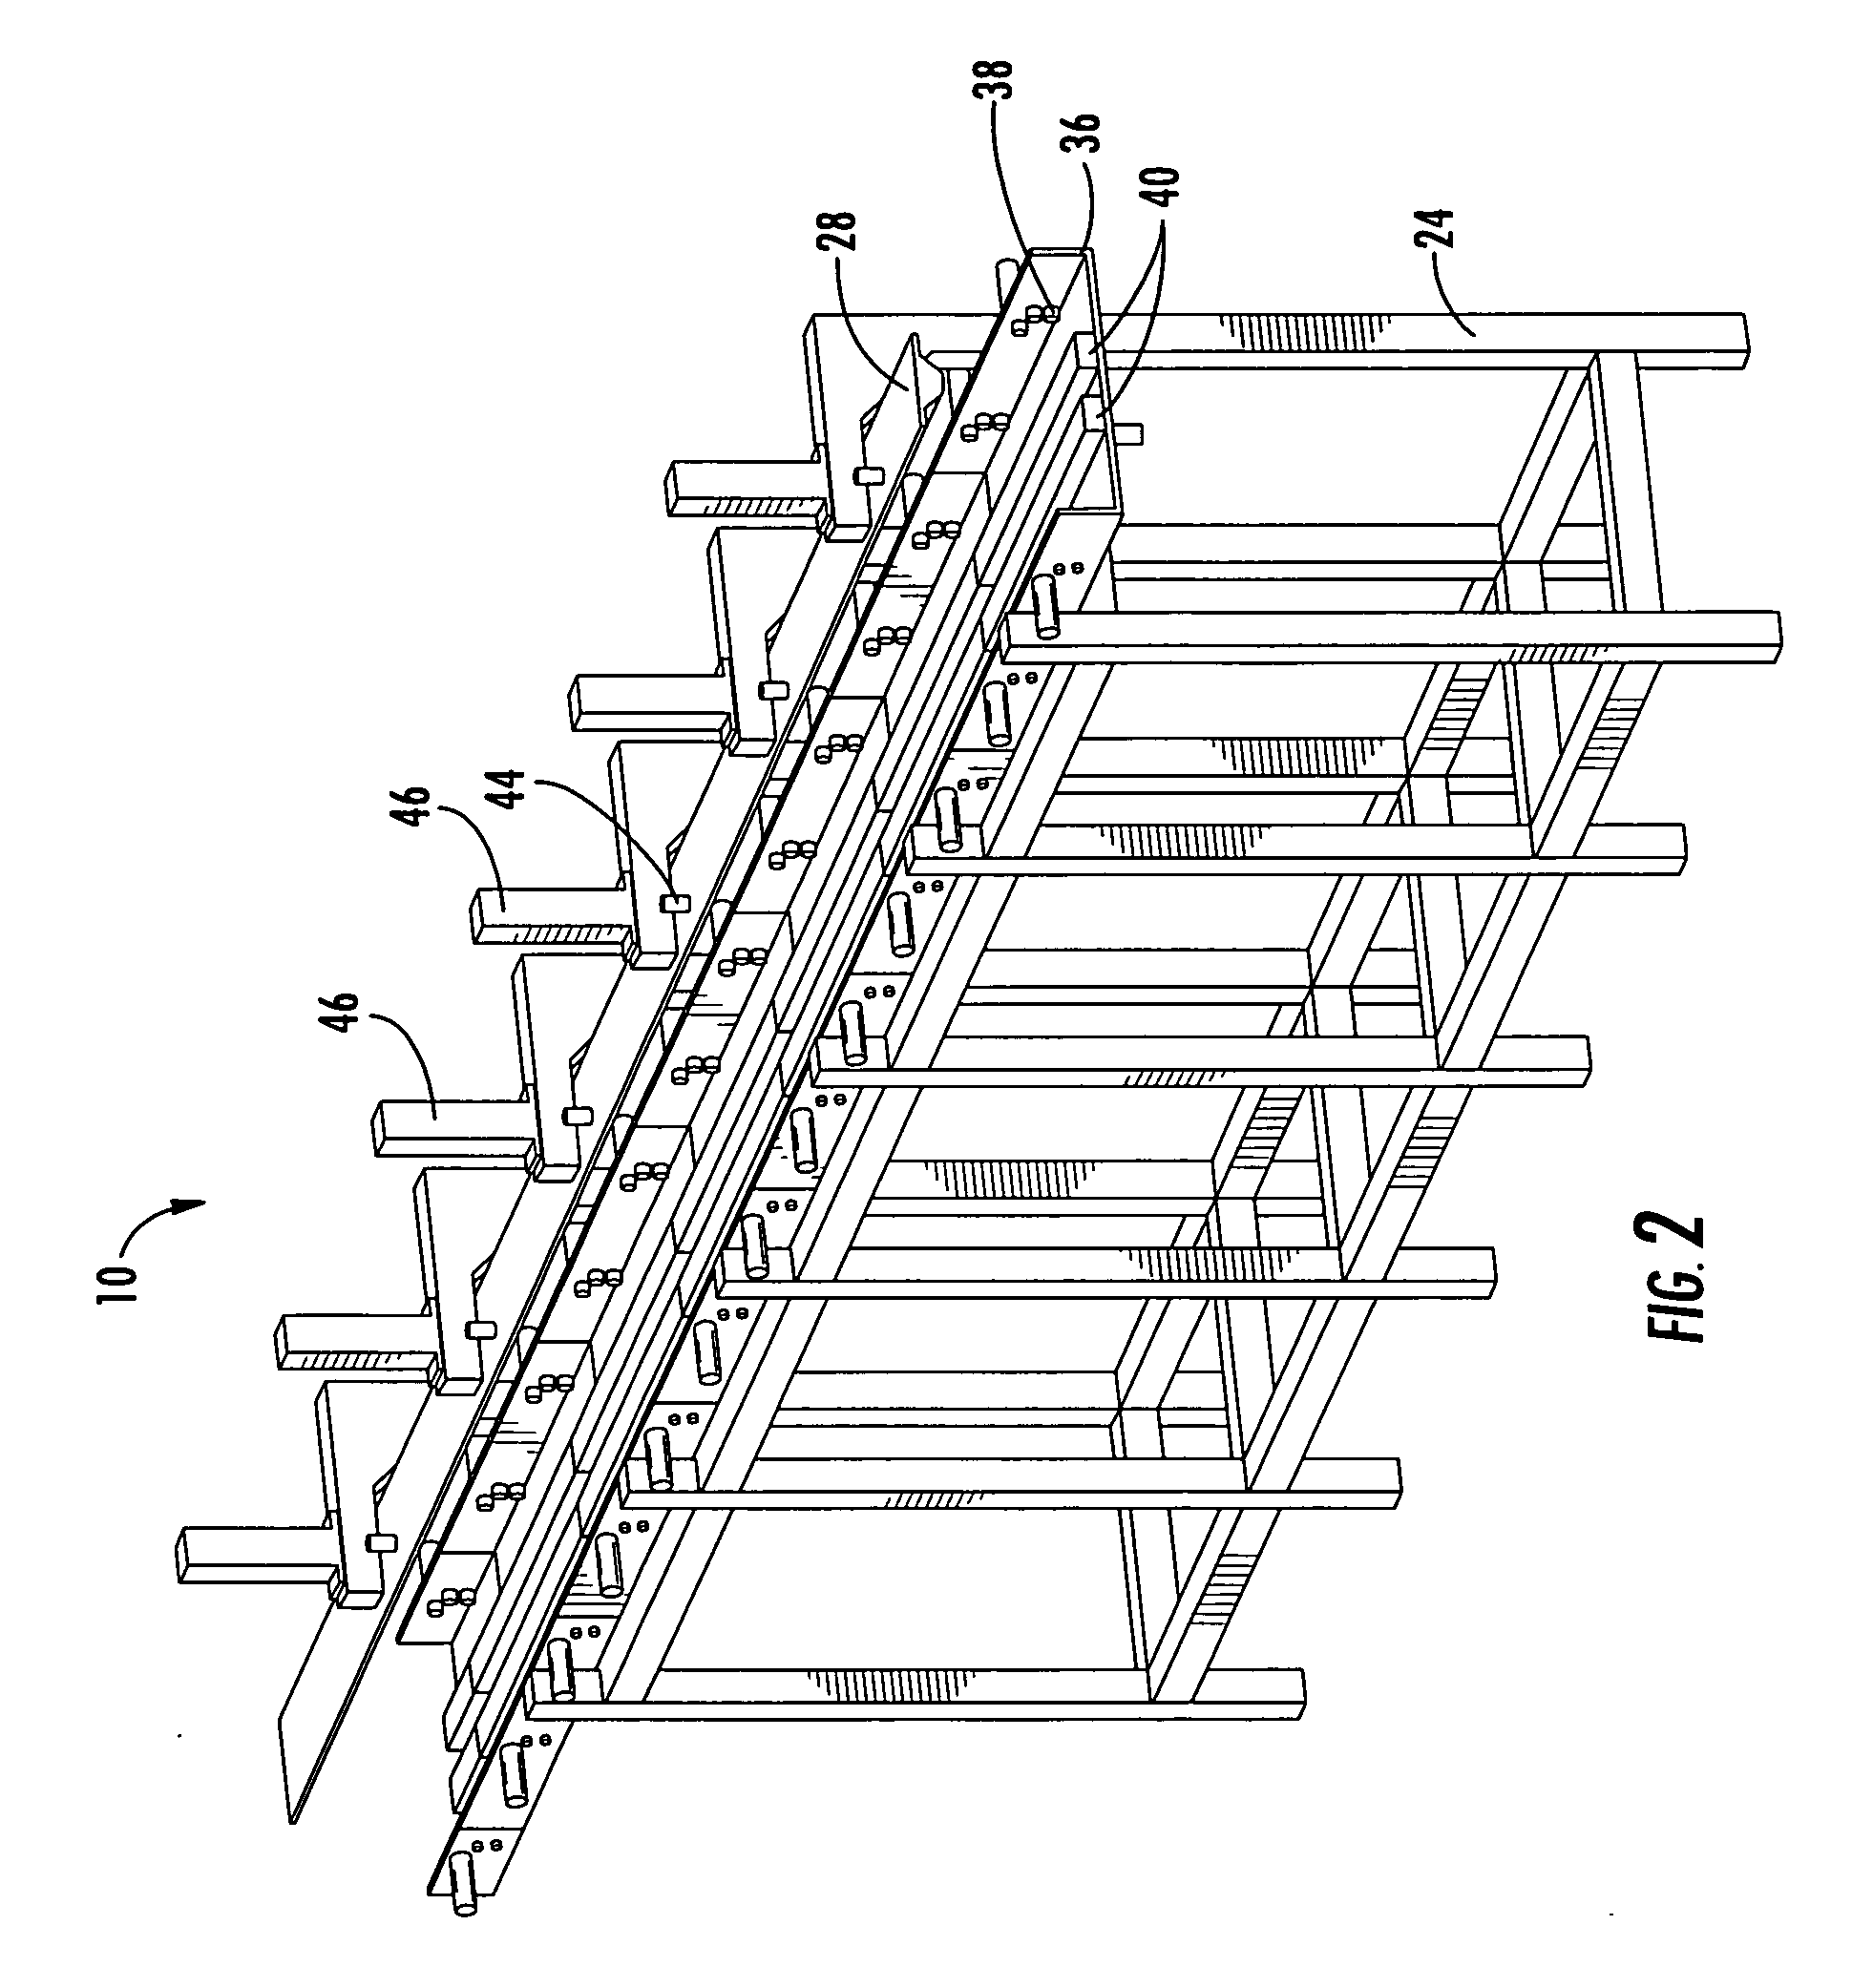 Method and apparatus for forming structural members